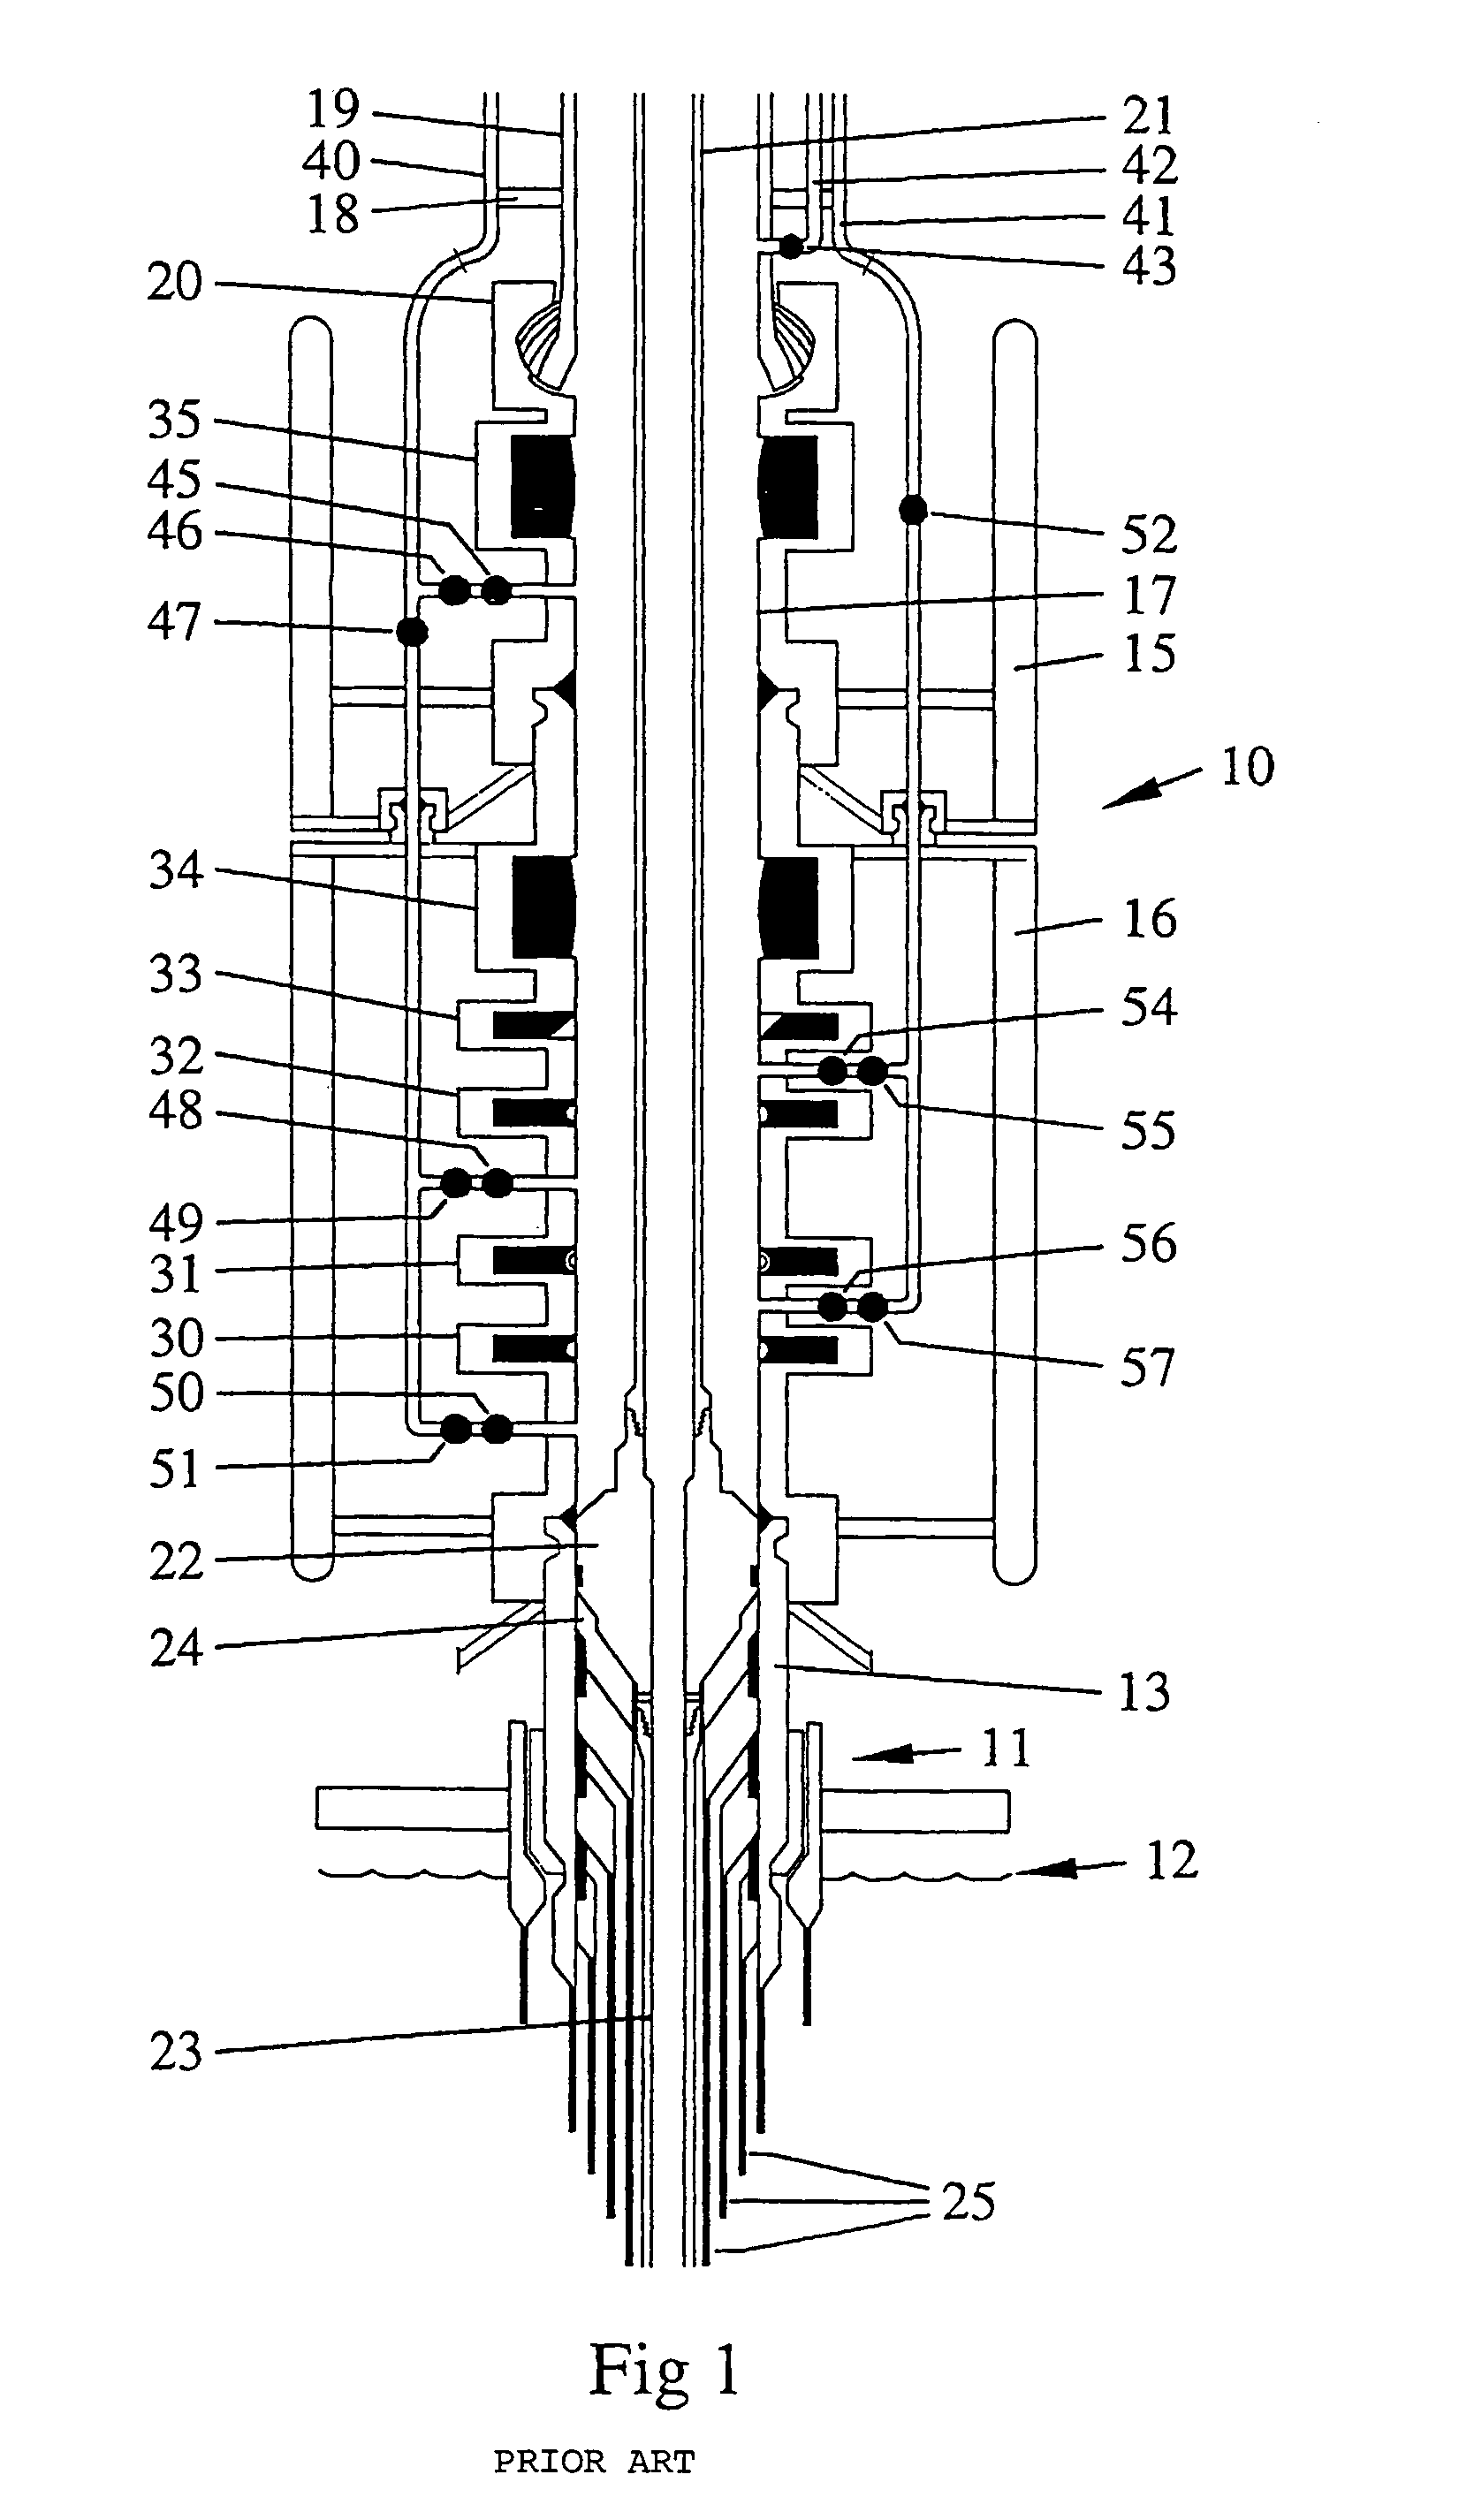 Blow out preventer testing apparatus